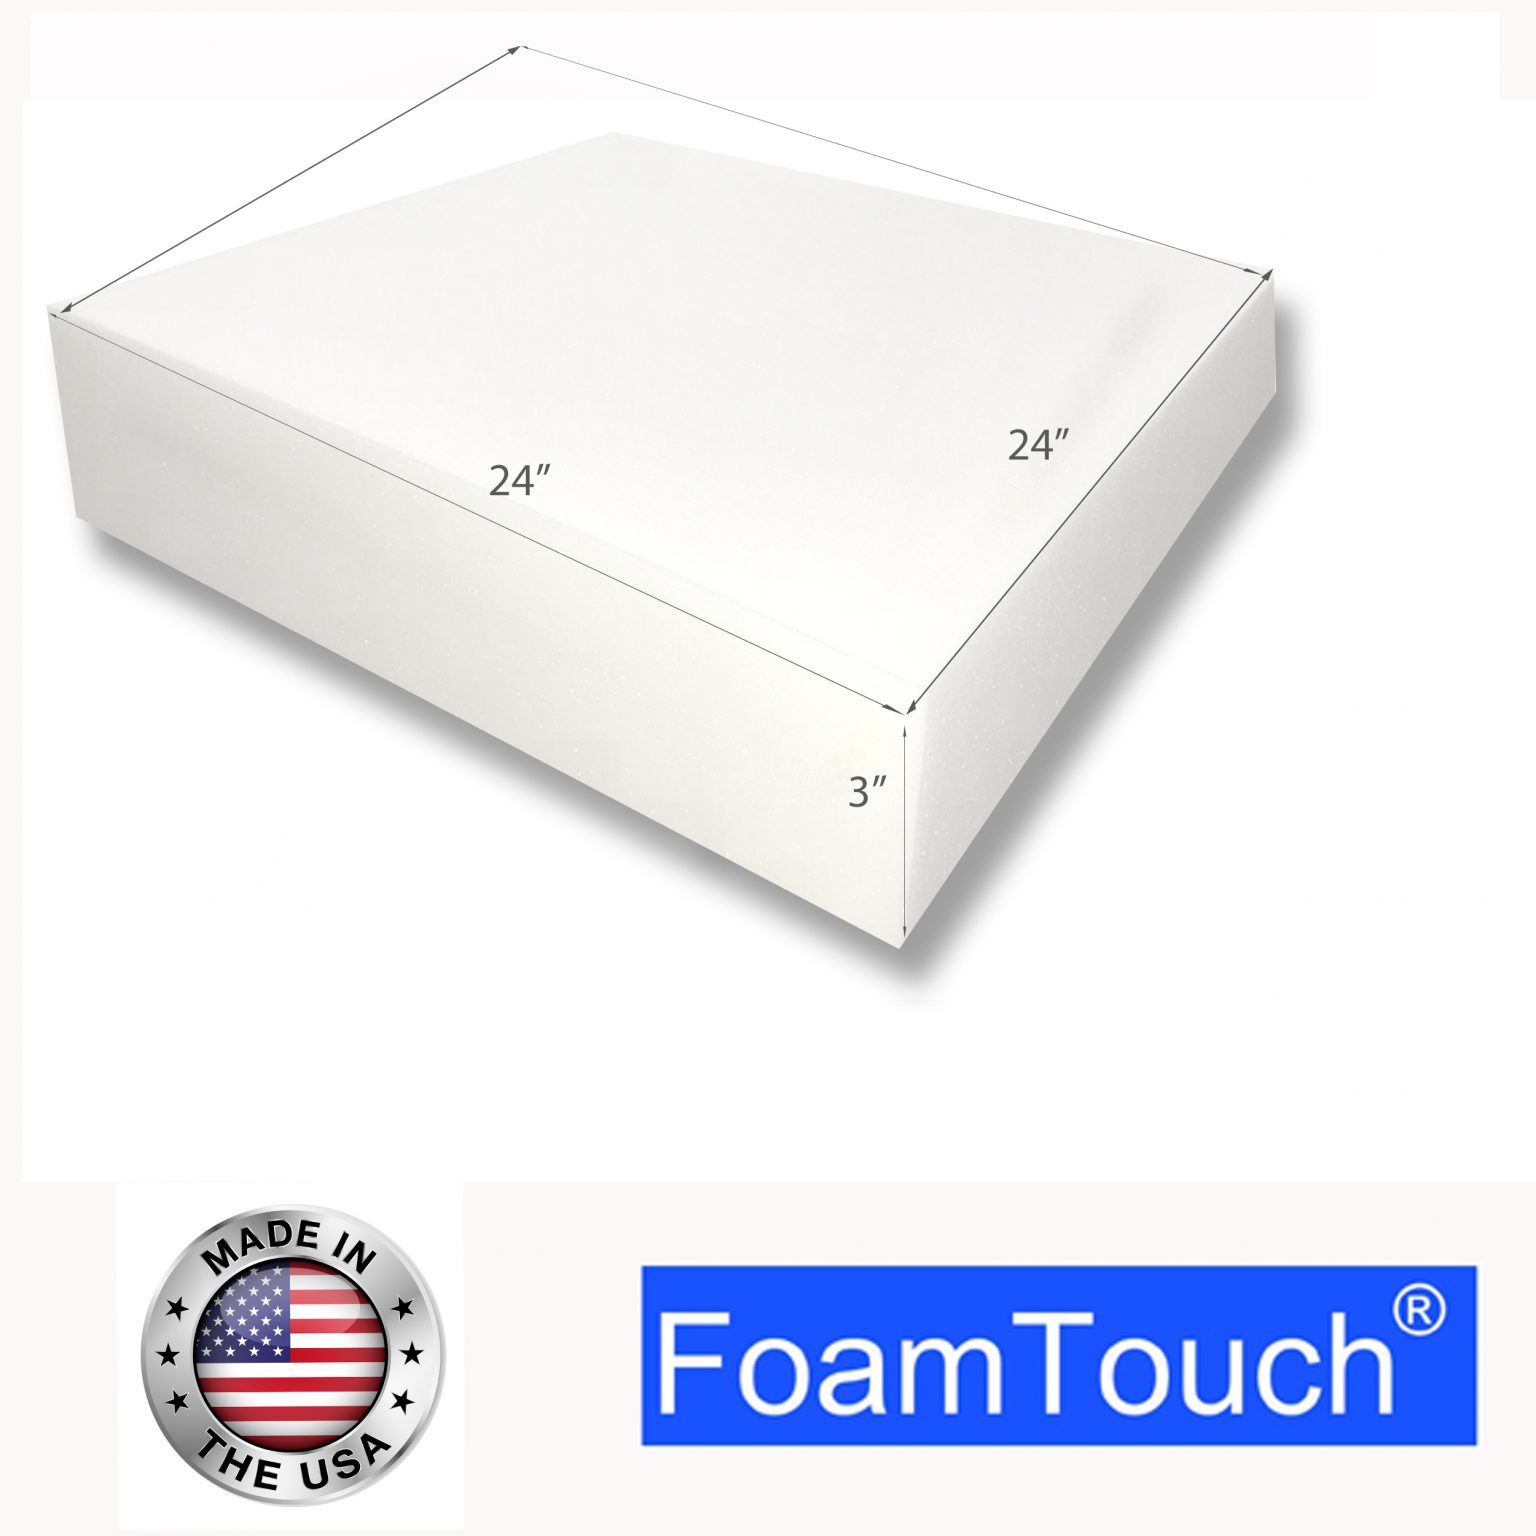 3 Inch Thickness | Product categories | Foamtouch